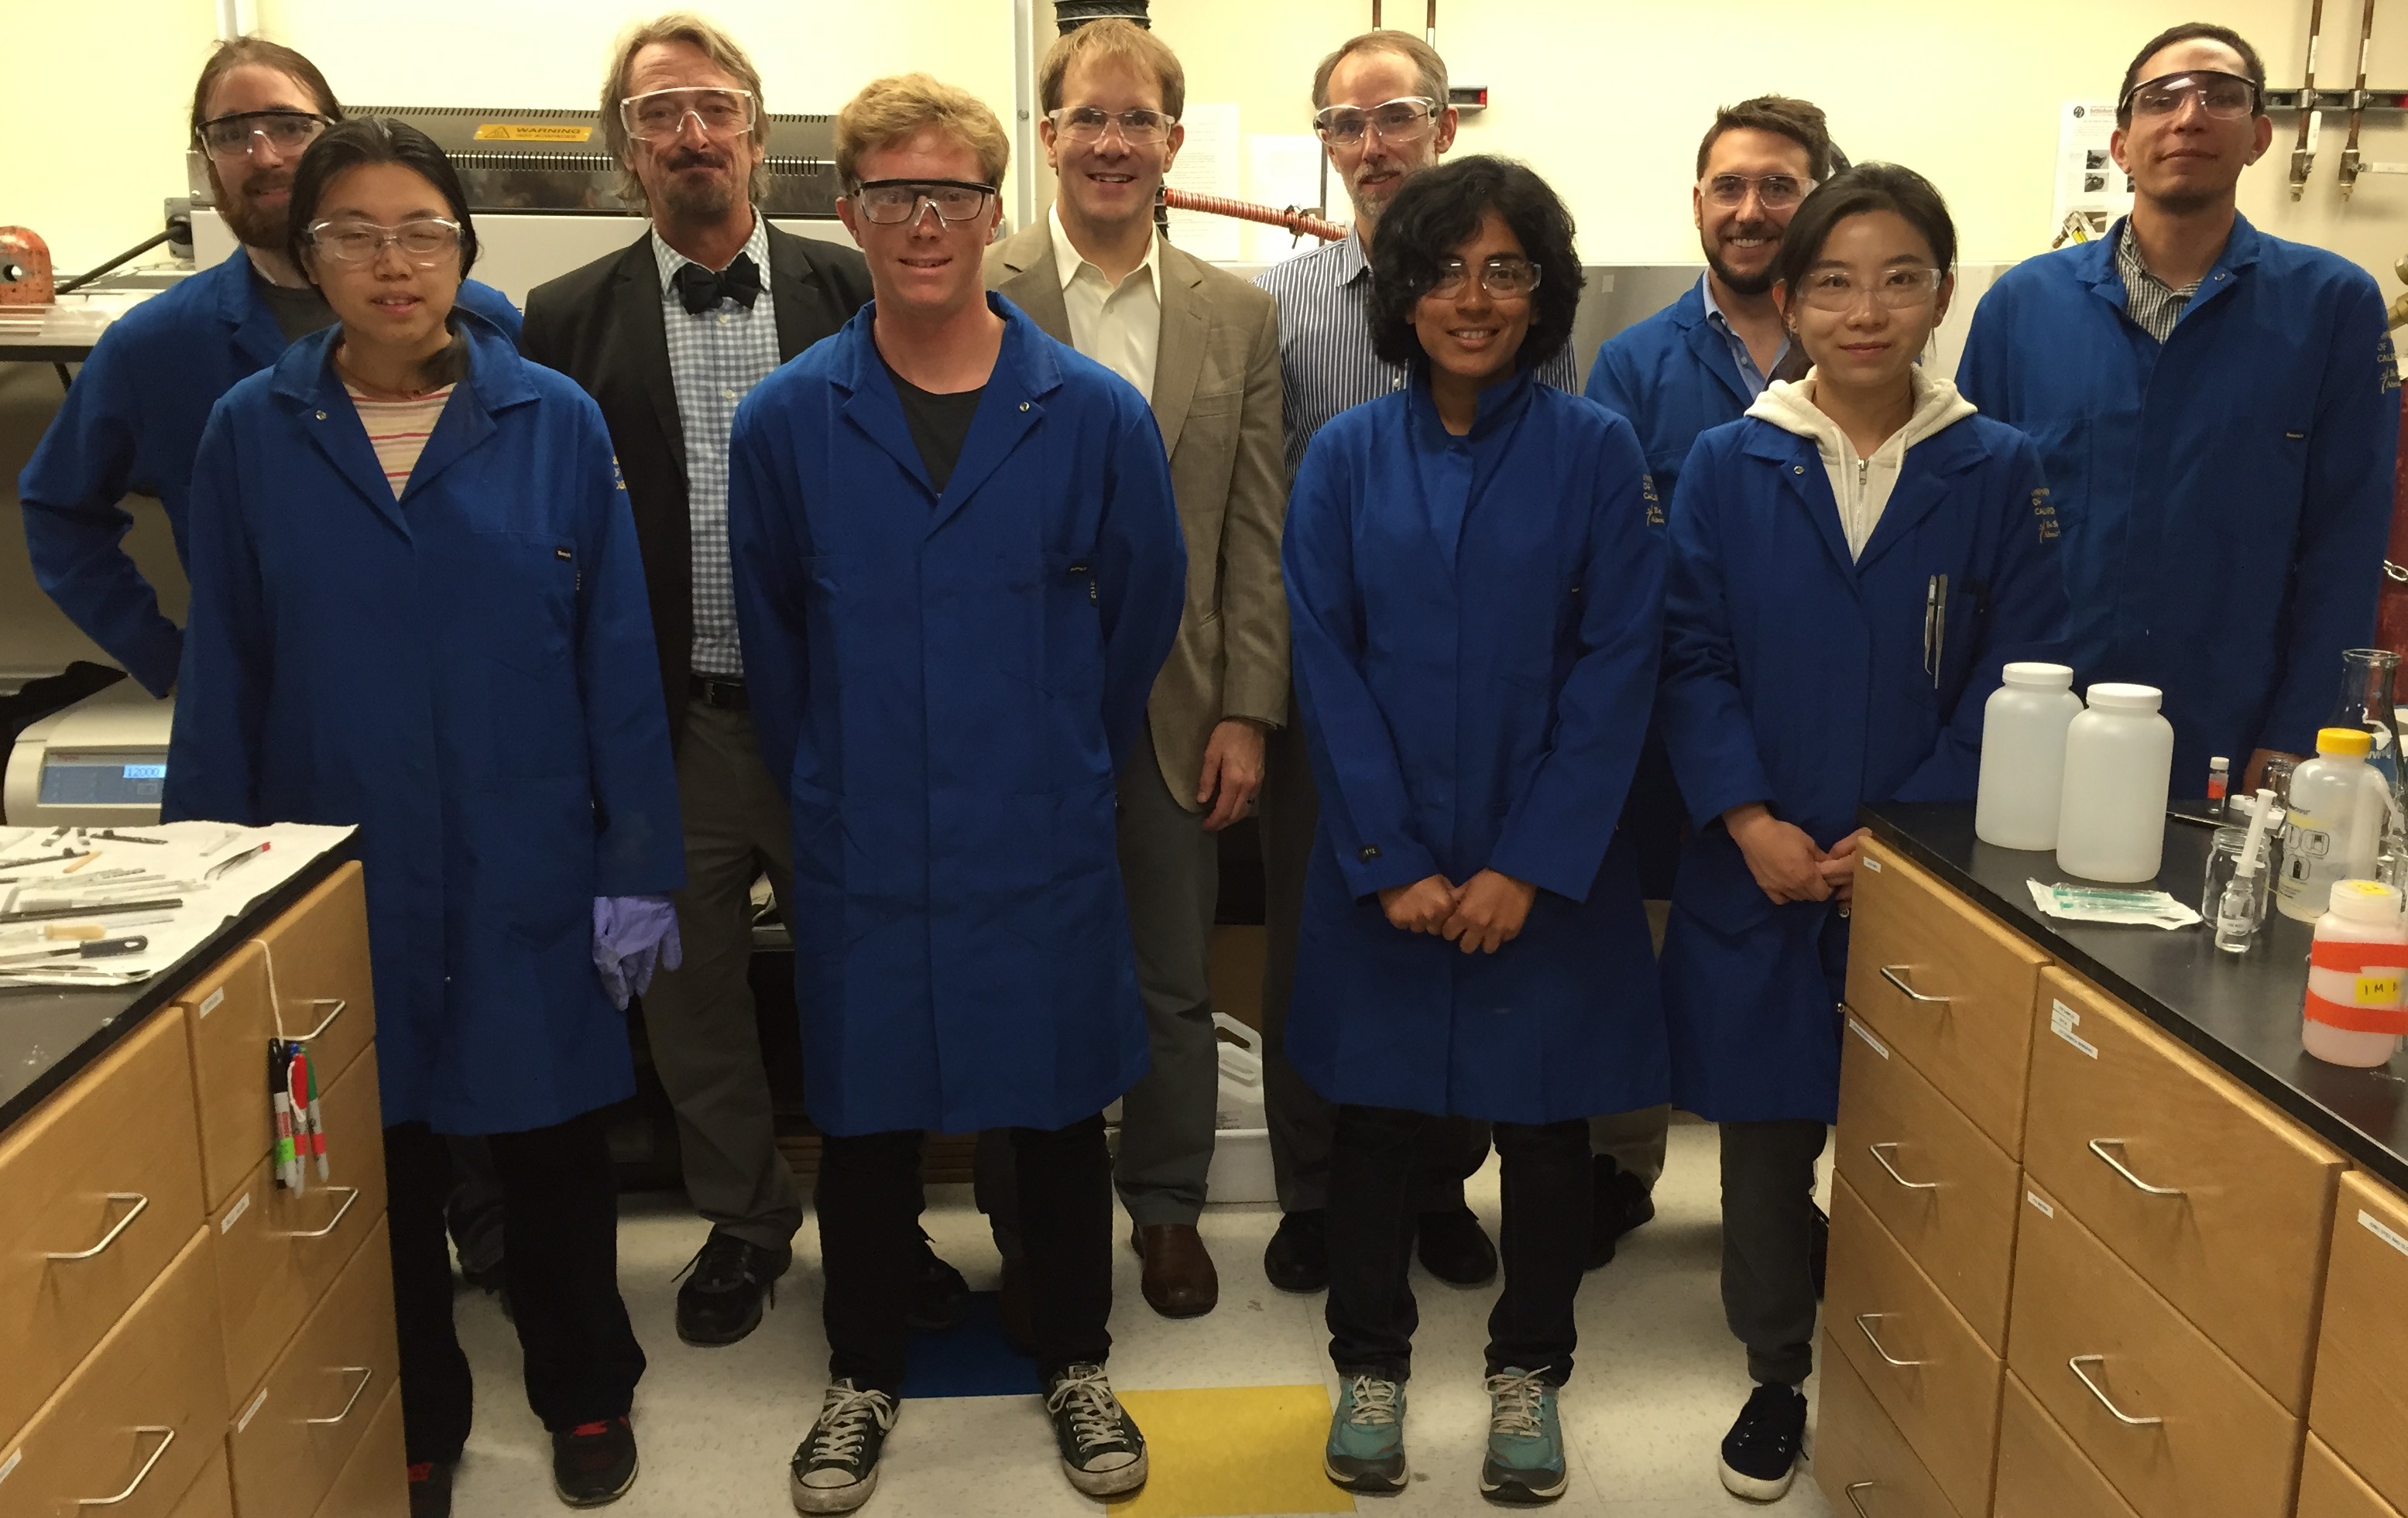 Dave Peterson, Eric Miller, and the EERE Incubator Program Team in the Ardo Laboratories